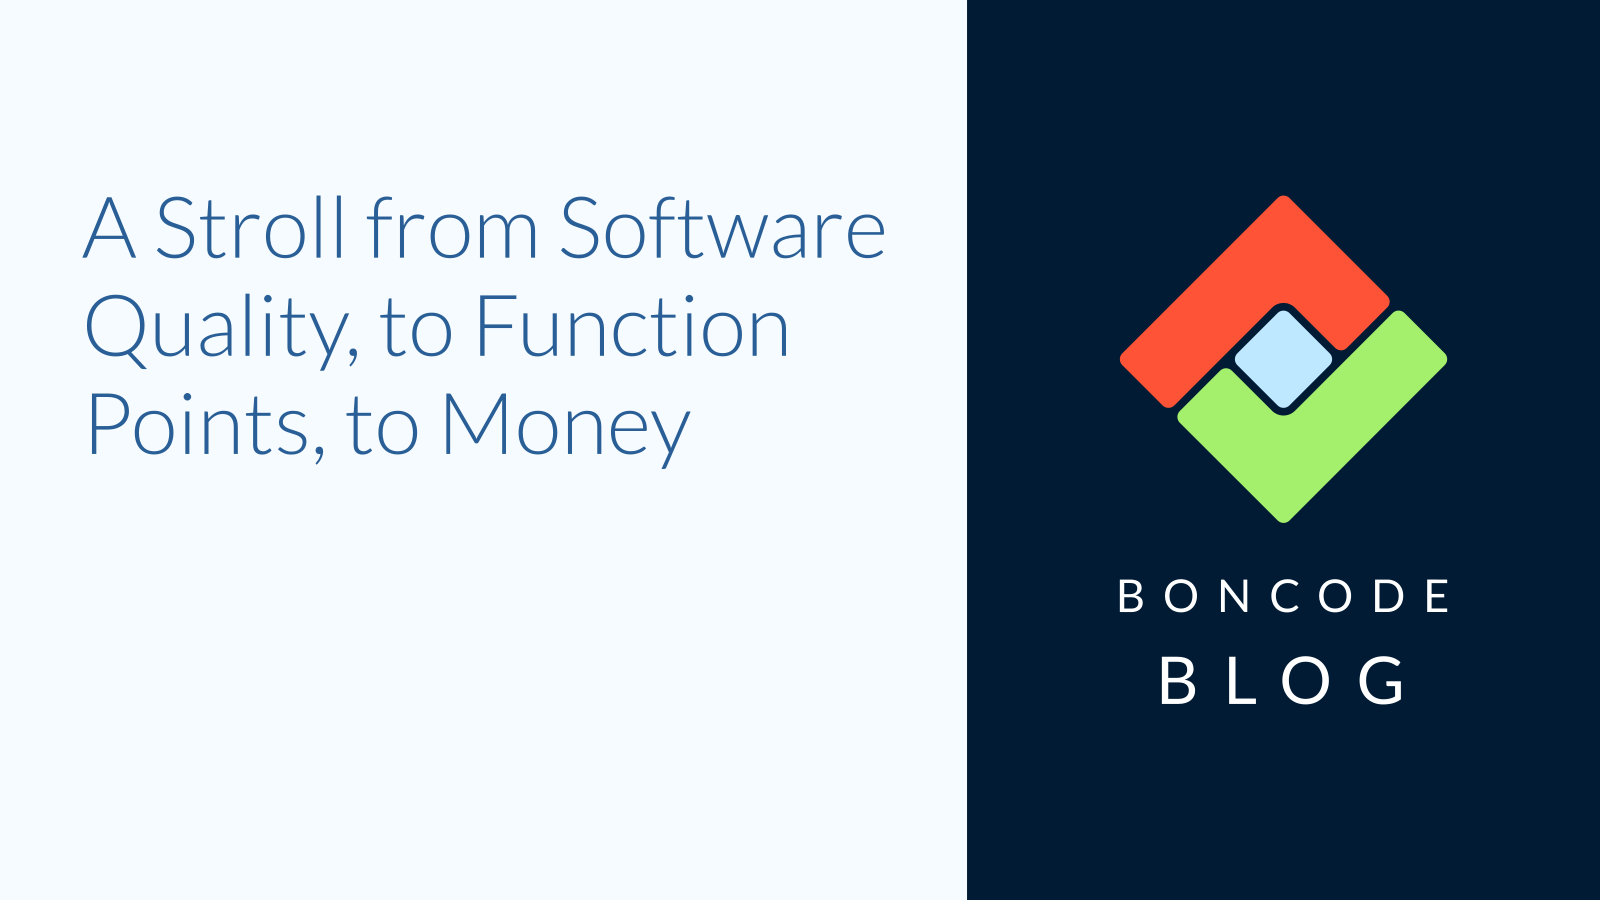 A stroll from software quality to function points to money